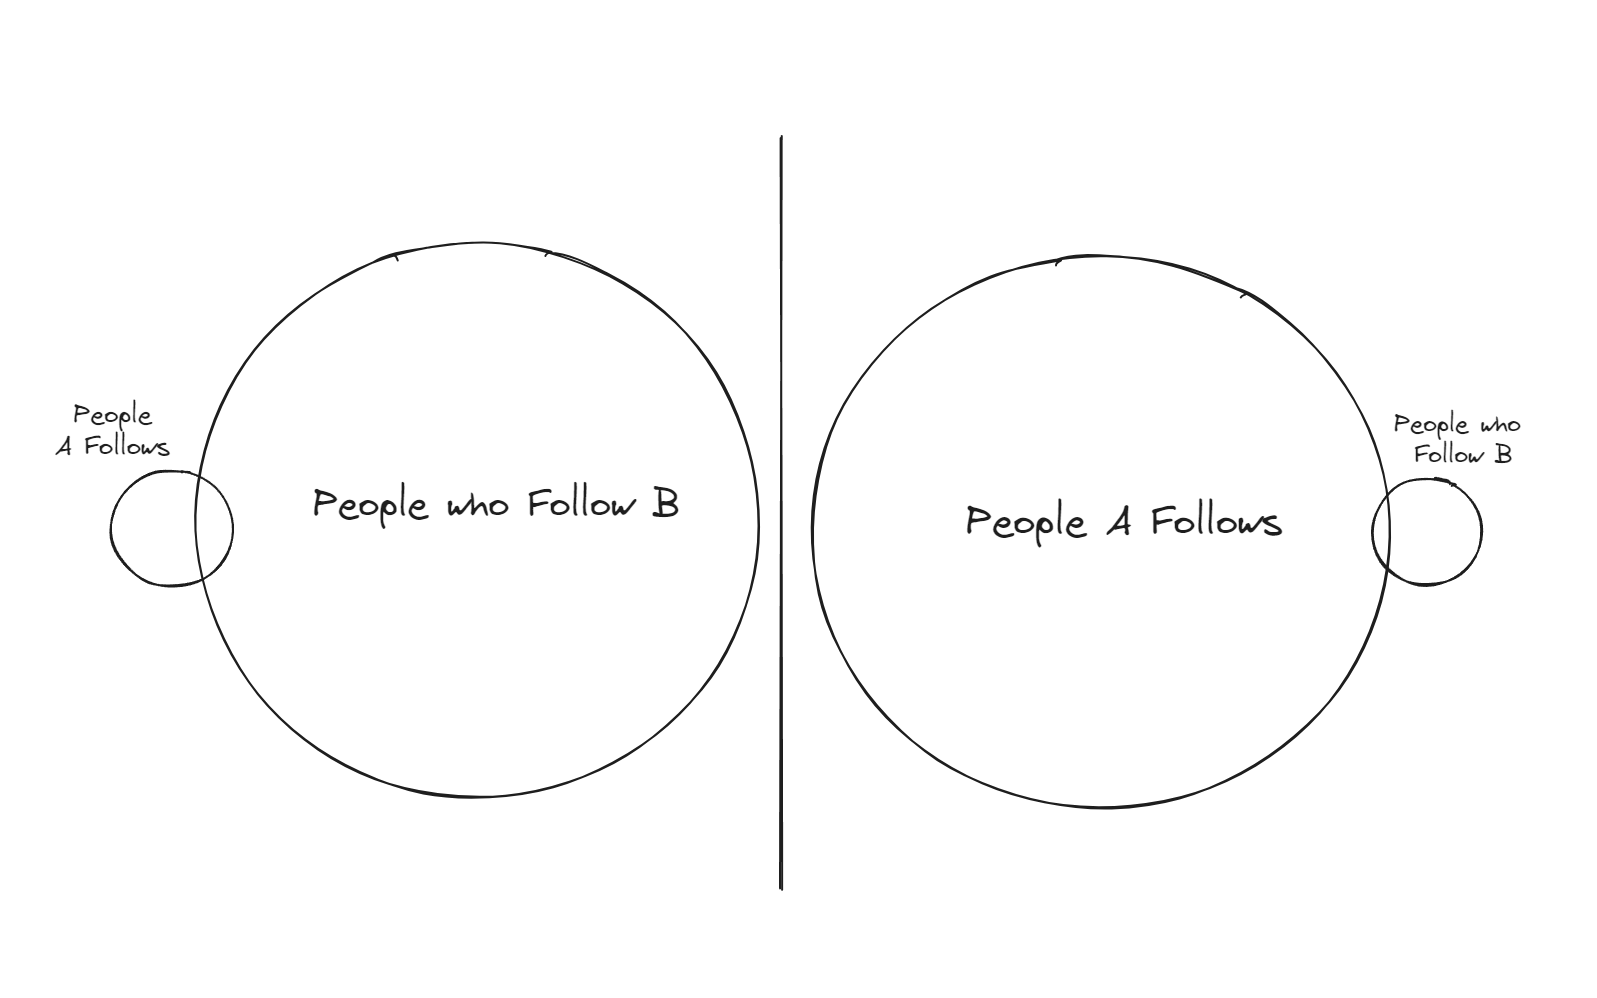 Diagram showing 2 versions of asymmetrical sizes of A and B follows/followers